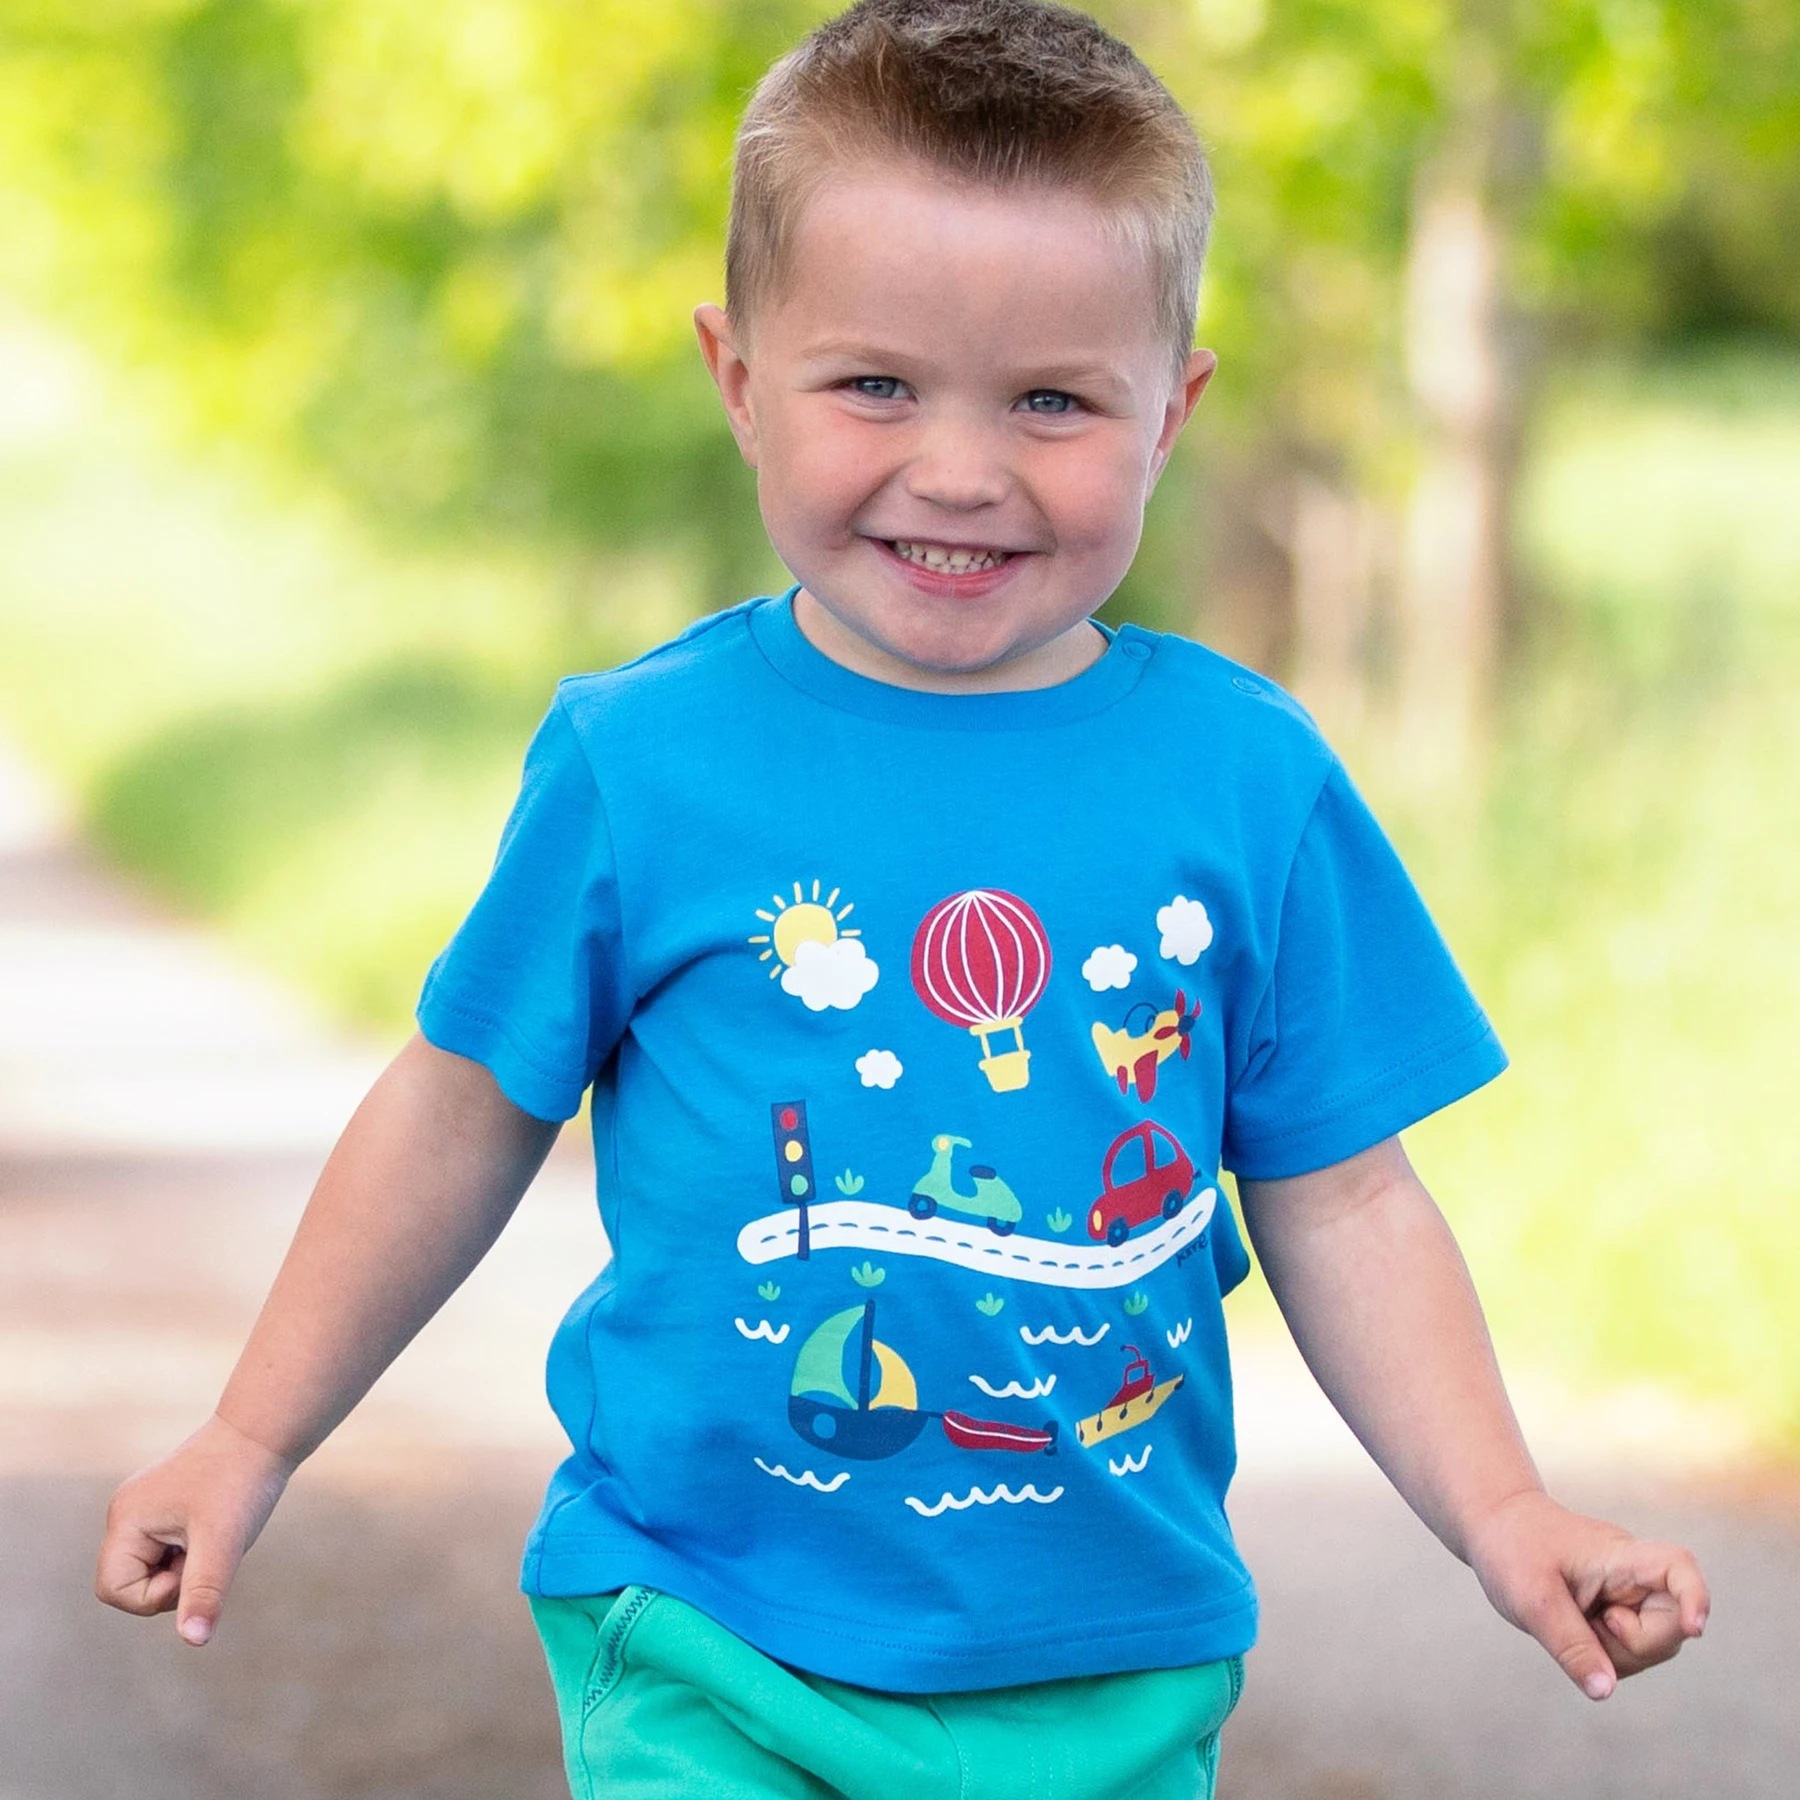 "Empower your little hero with a trendy superhero-themed boys' T-shirt."